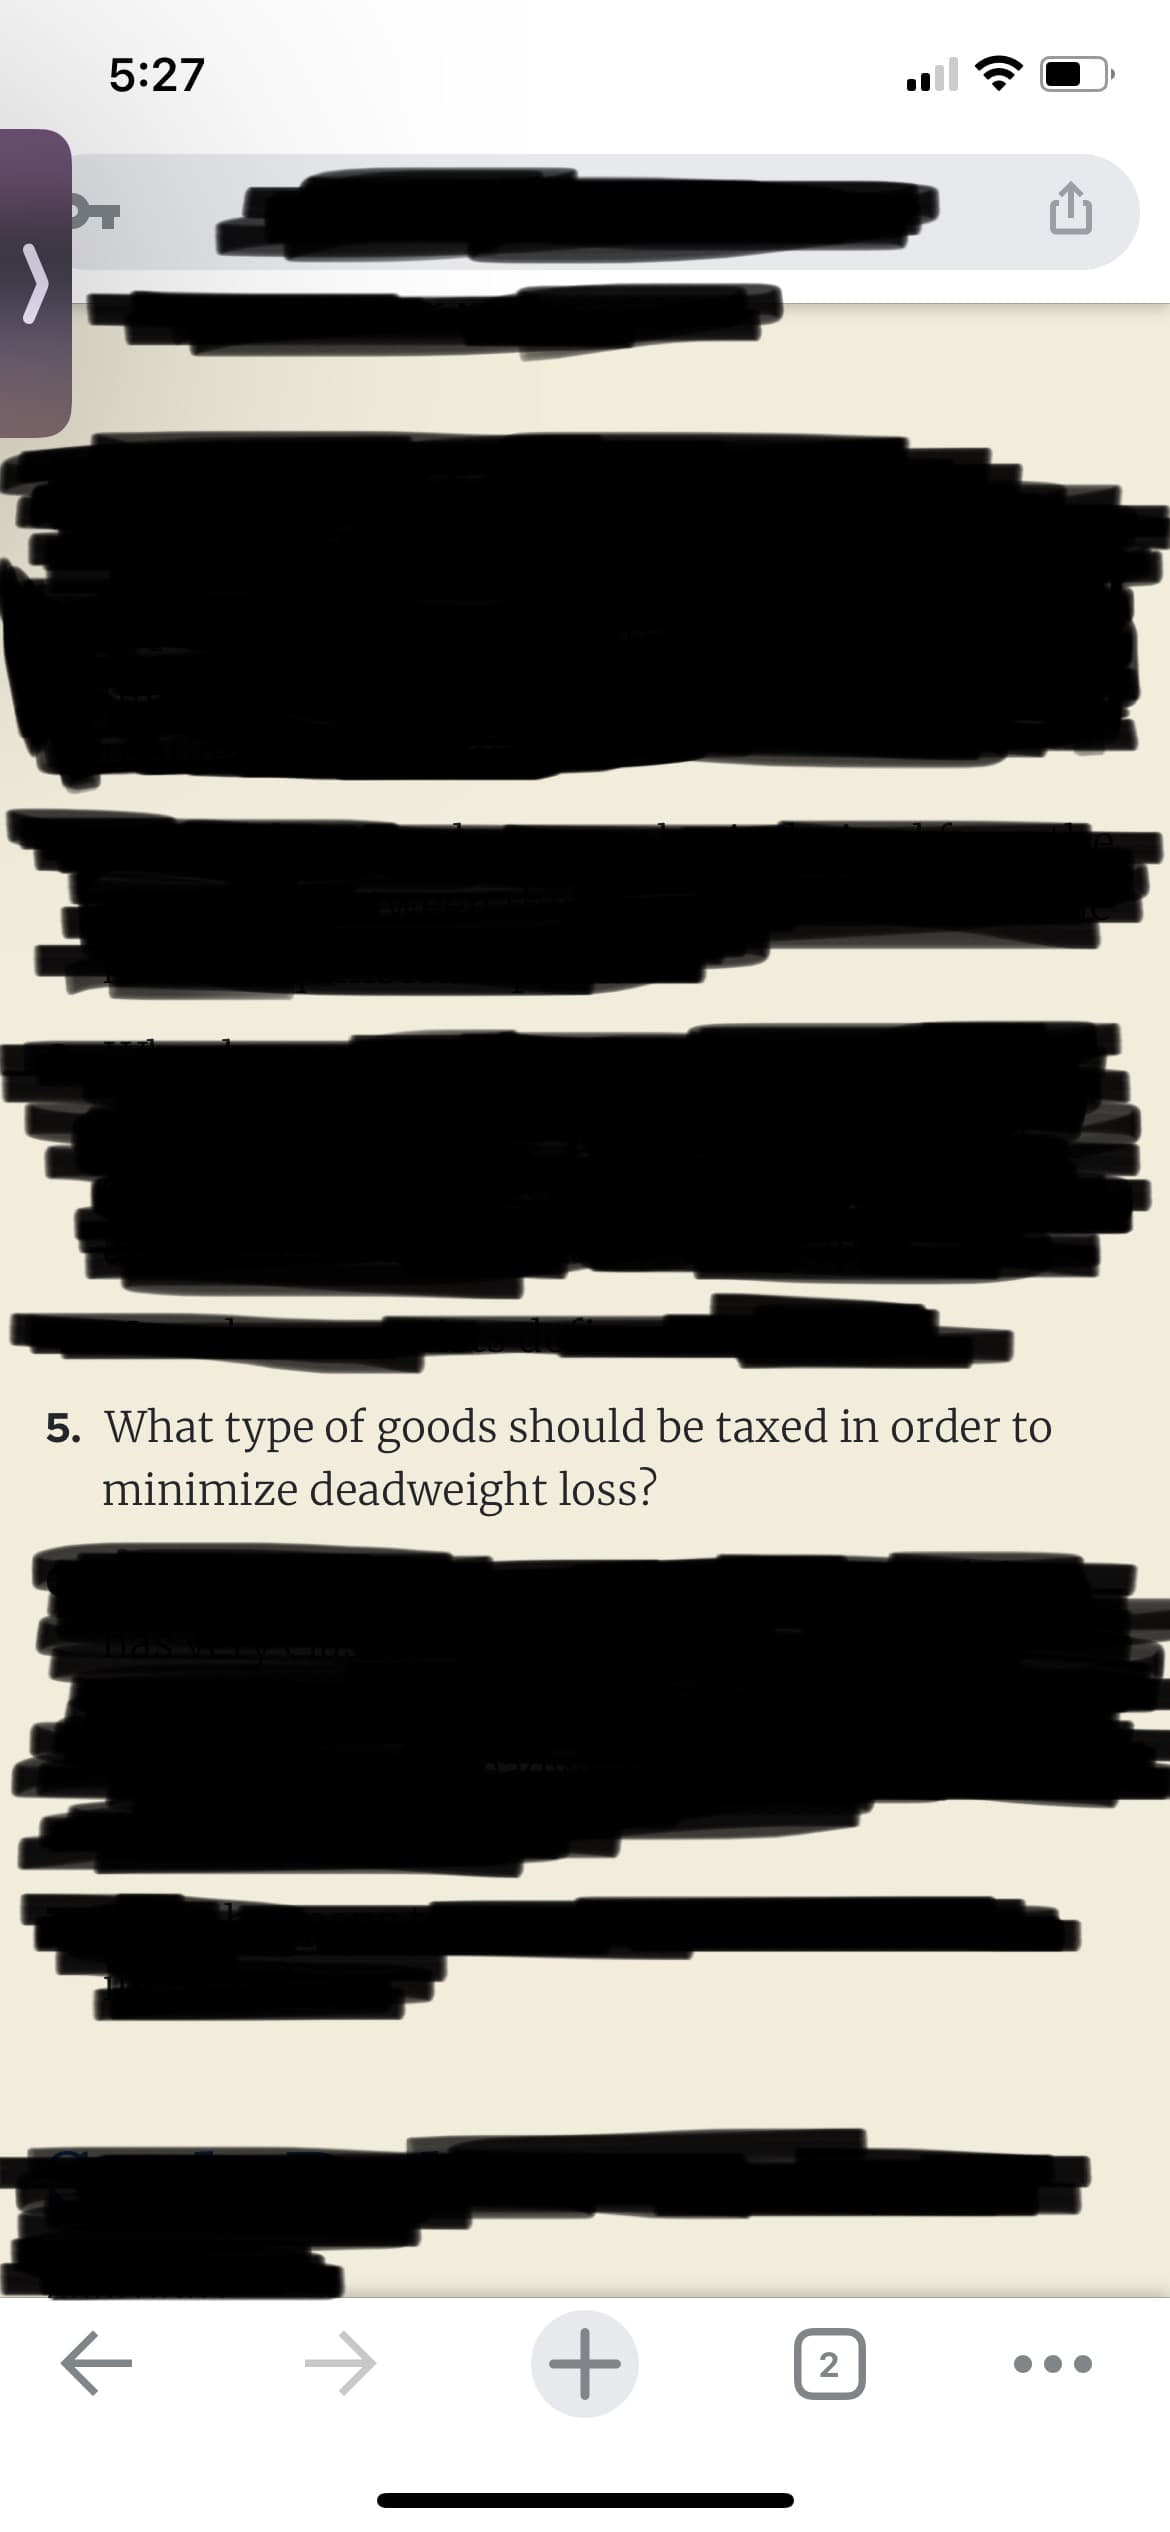 5:27
5. What type of goods should be taxed in order to
minimize deadweight
loss?
к
↑
+
:
2